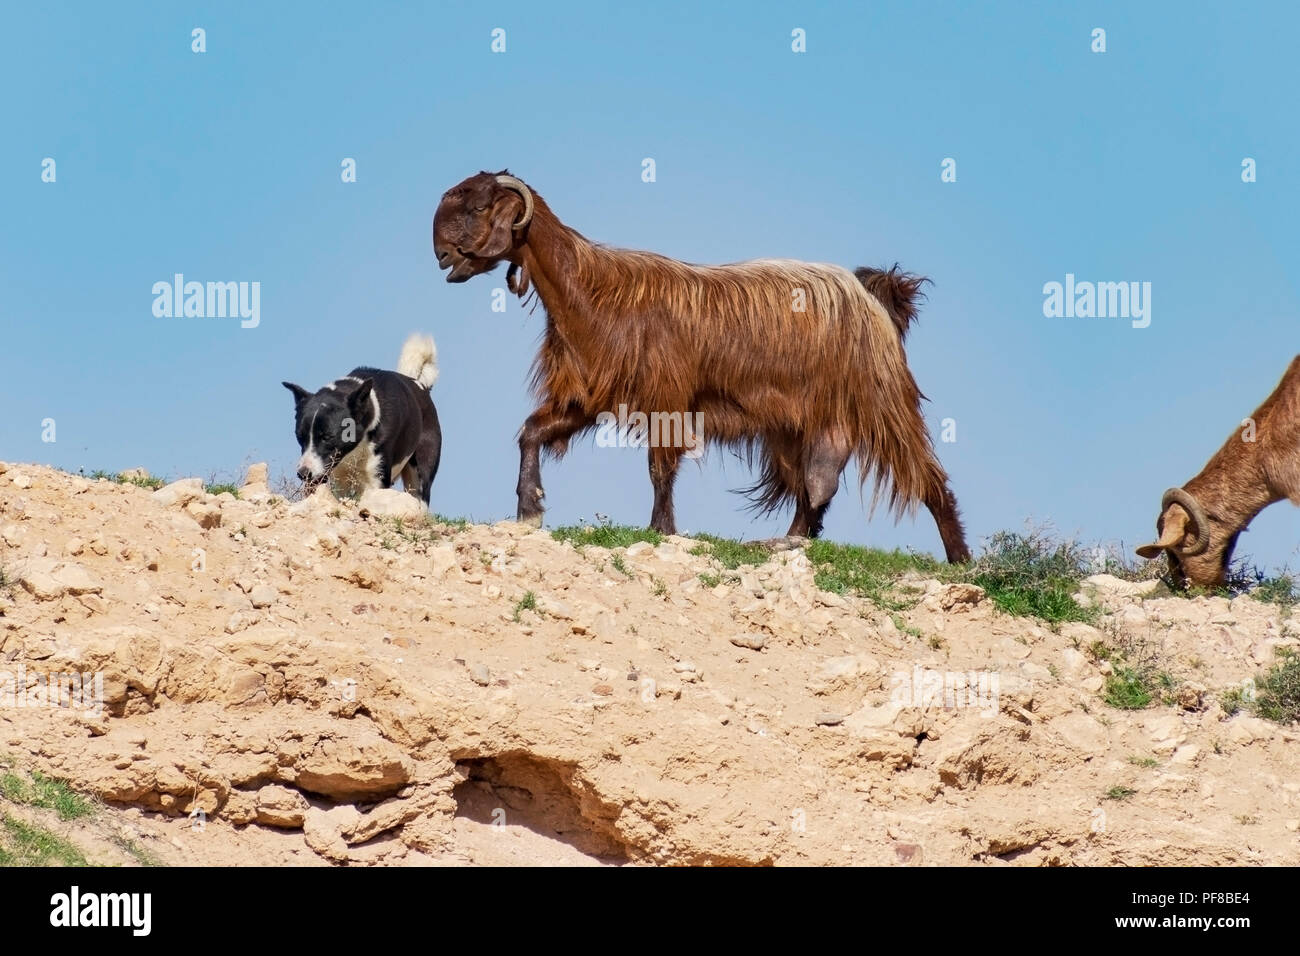 black and white bedouin canaan dog herding goats on a negev desert hilltop against a clear blue sky Stock Photo